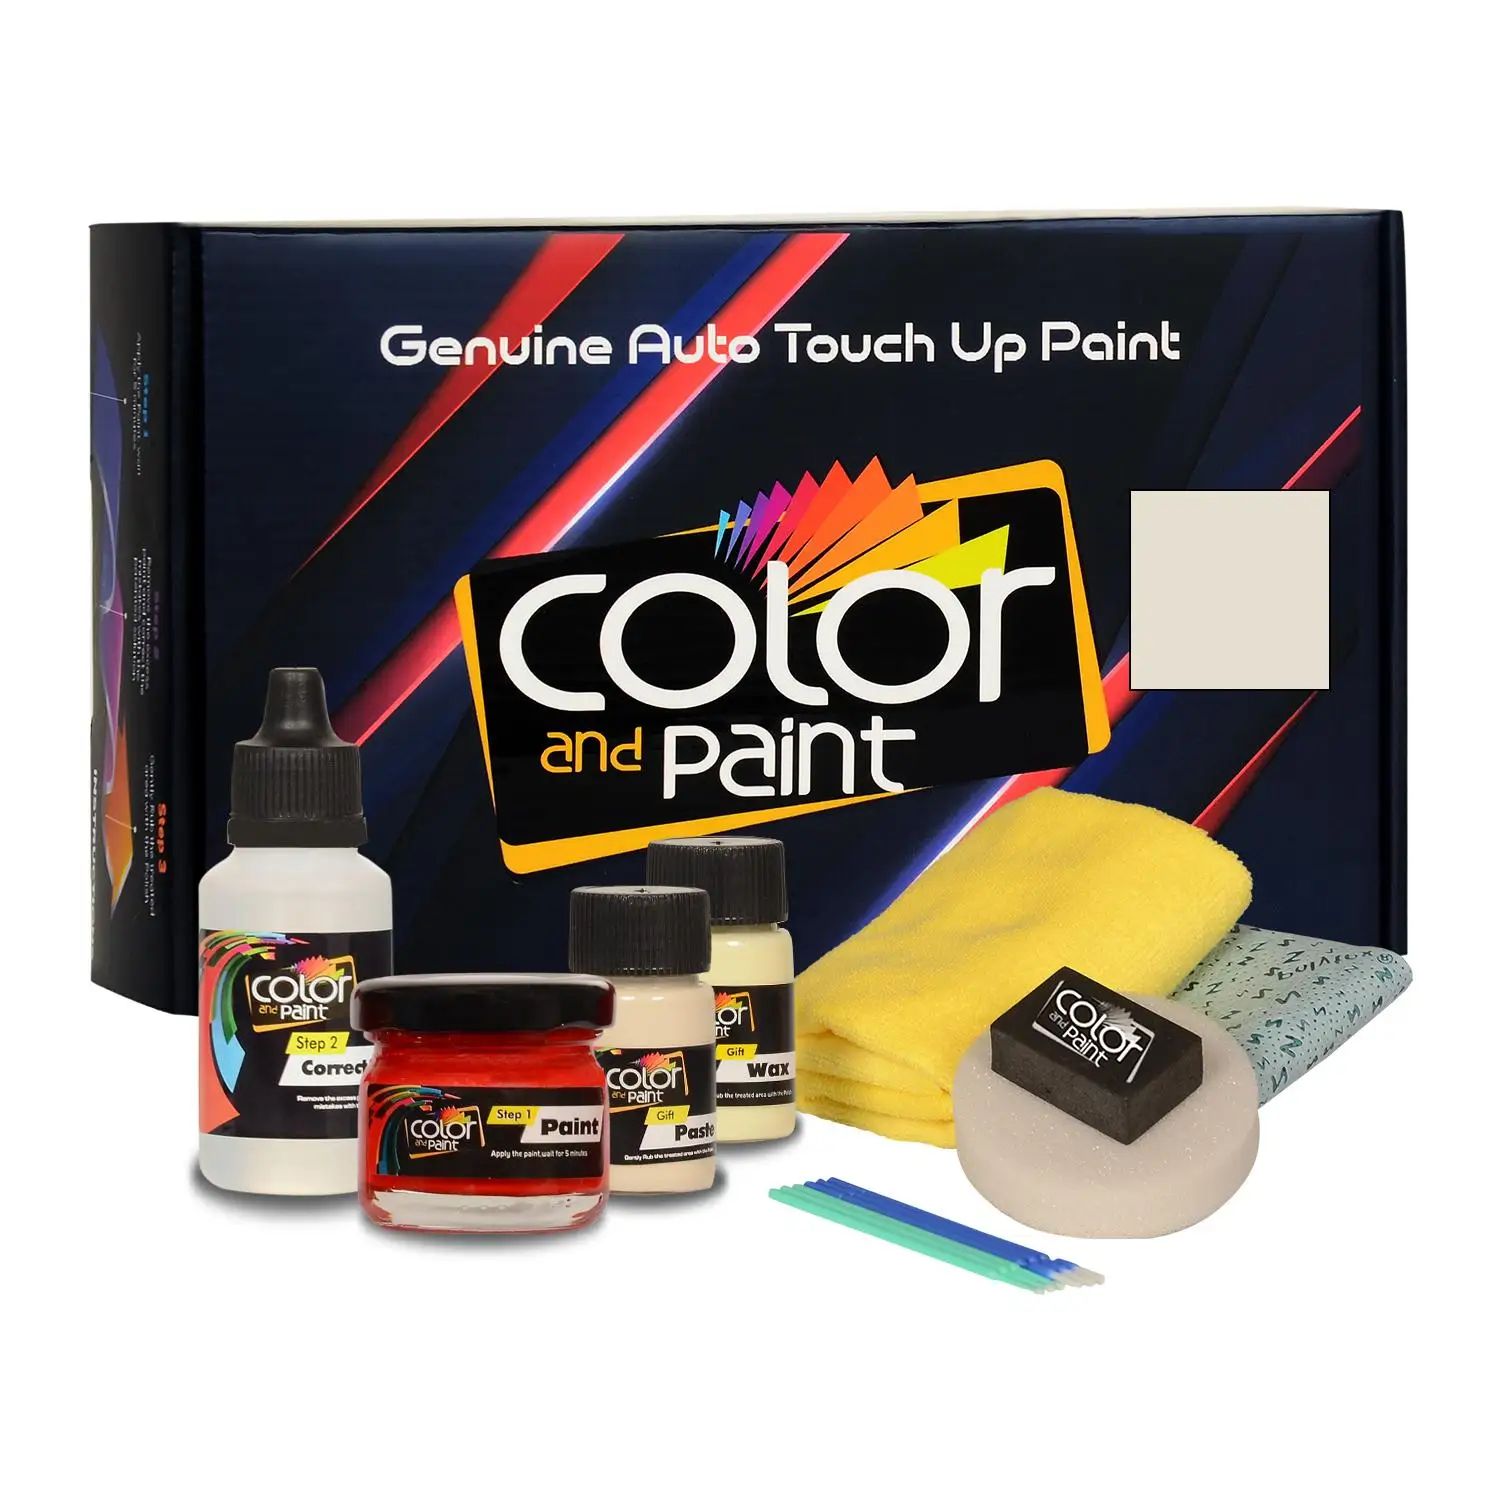 

Color and Paint compatible with Fiat Automotive Touch Up Paint - GARA WHITE - 268/A - Basic Care